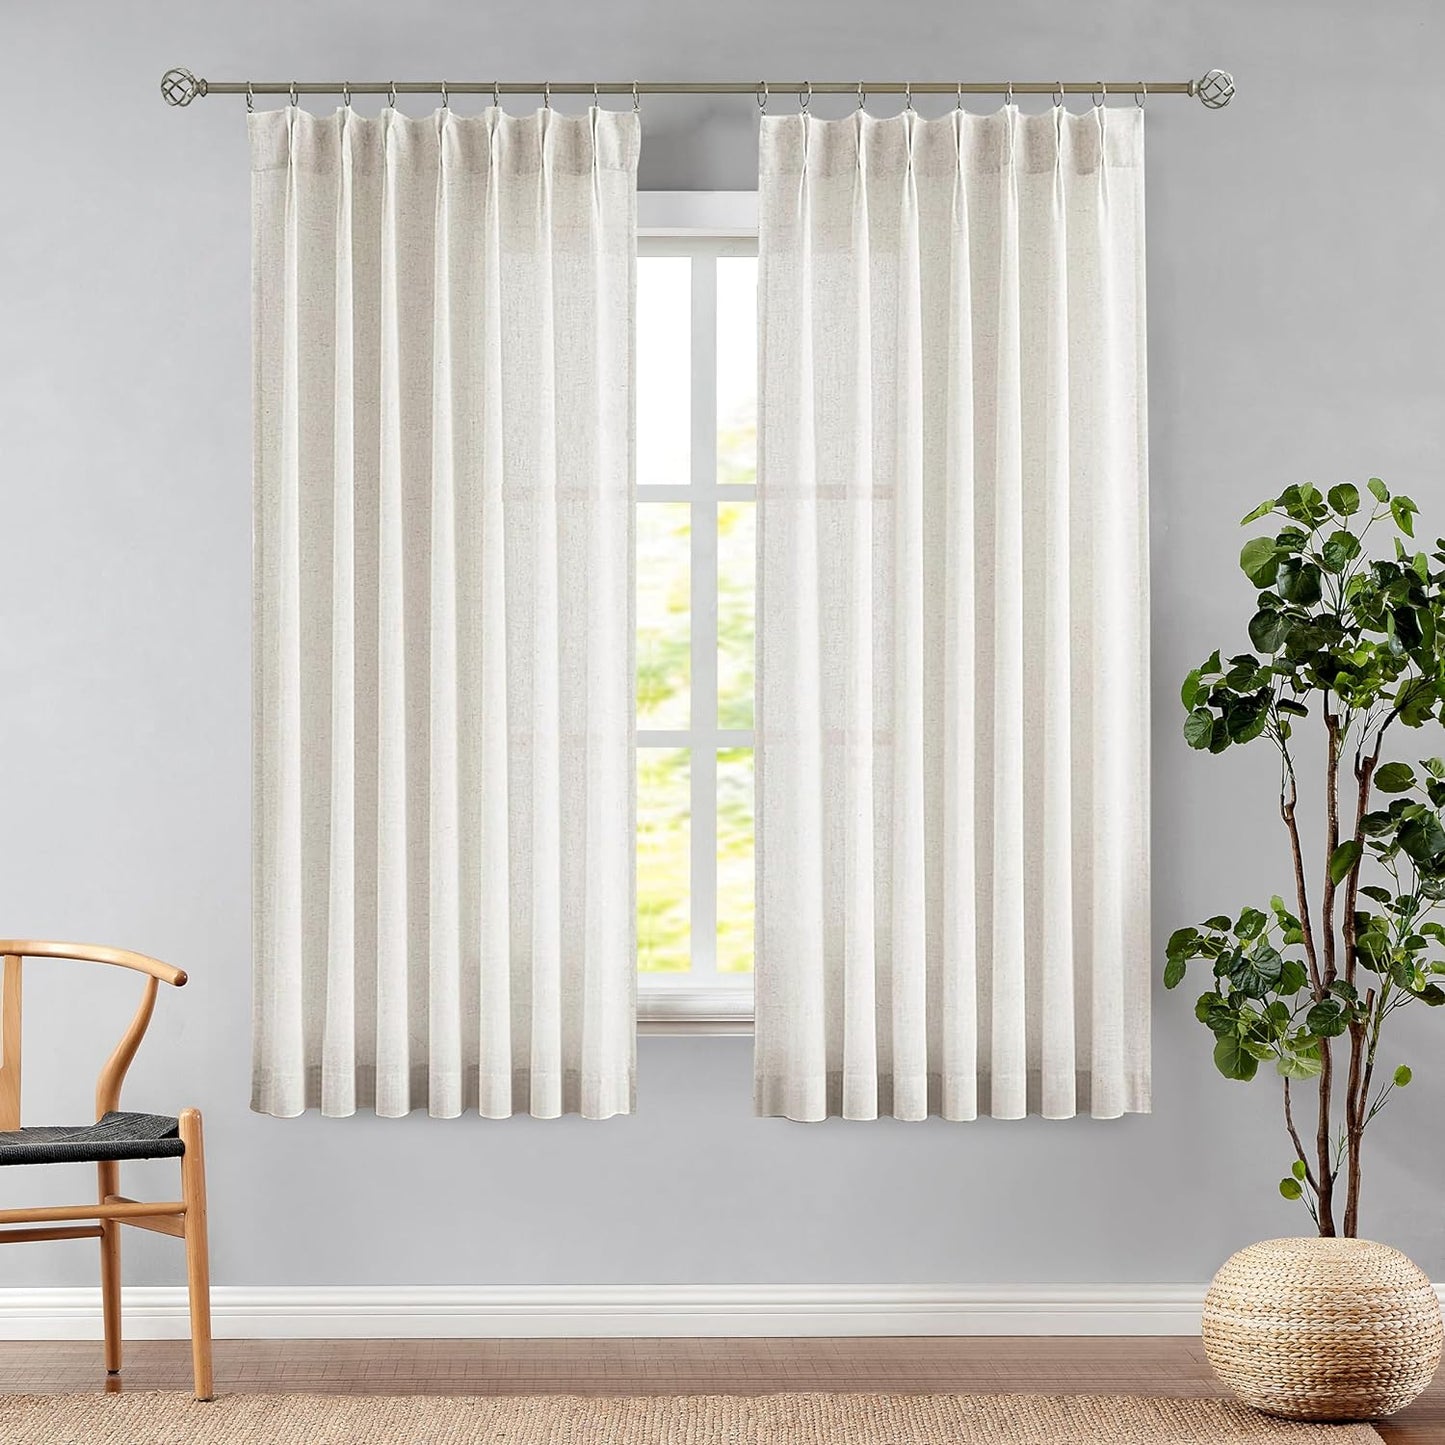 Central Park White Pinch Pleat Sheer Curtain 108 Inches Extra Long Textured Farmhouse Window Treatment Drapery Sets for Living Room Bedroom, 40"X108"X2  Central Park Linen/Pinch 40"X72"X2 